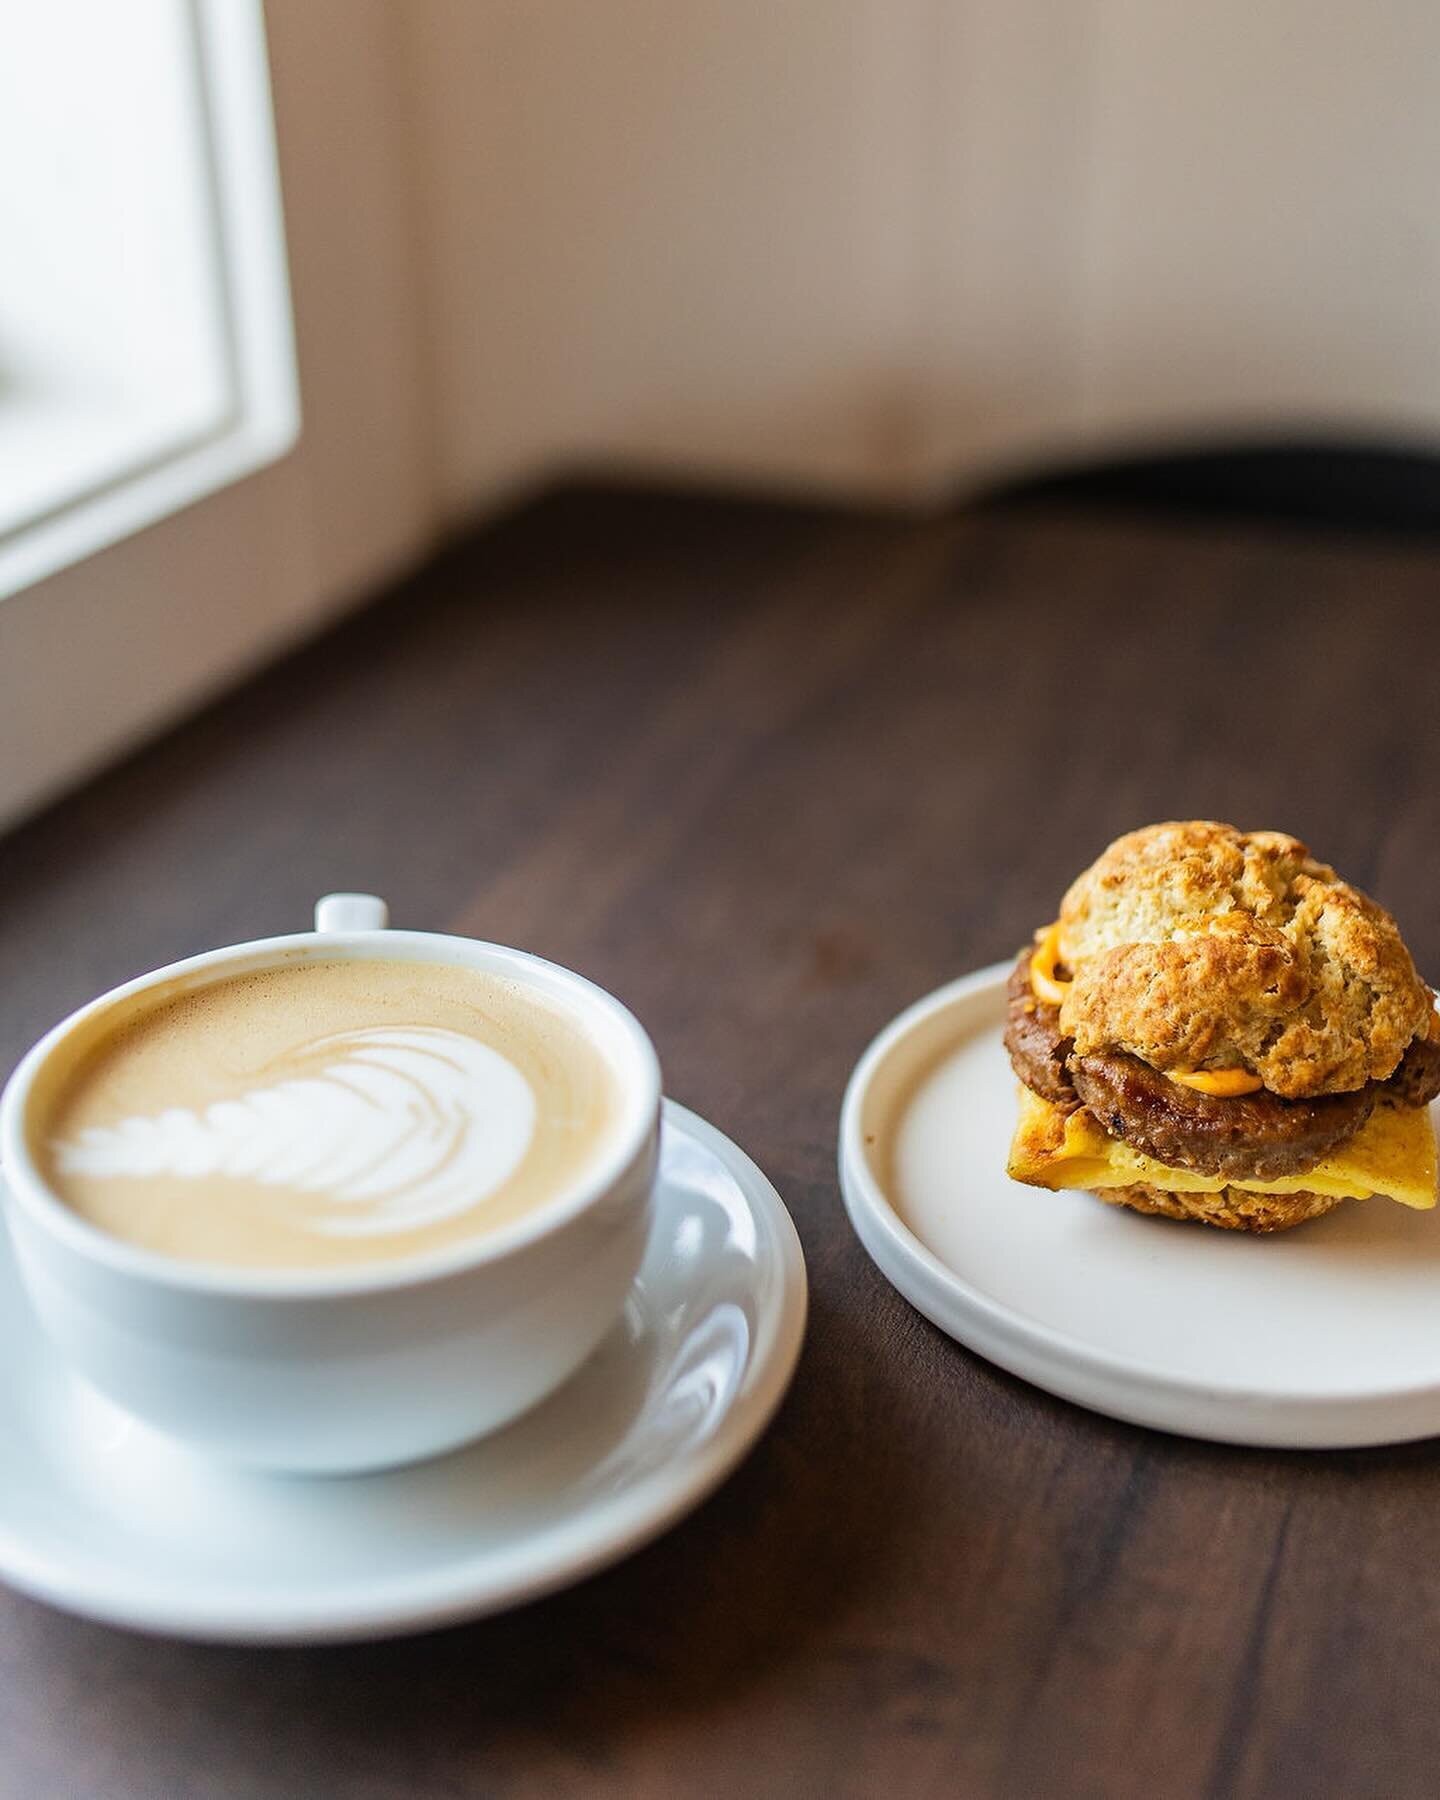 are you getting our breakfast sammie with a house-made biscuit or GF bagel? 🤔 (from the &ldquo;breakfast-all-day&rdquo; menu 🤤)